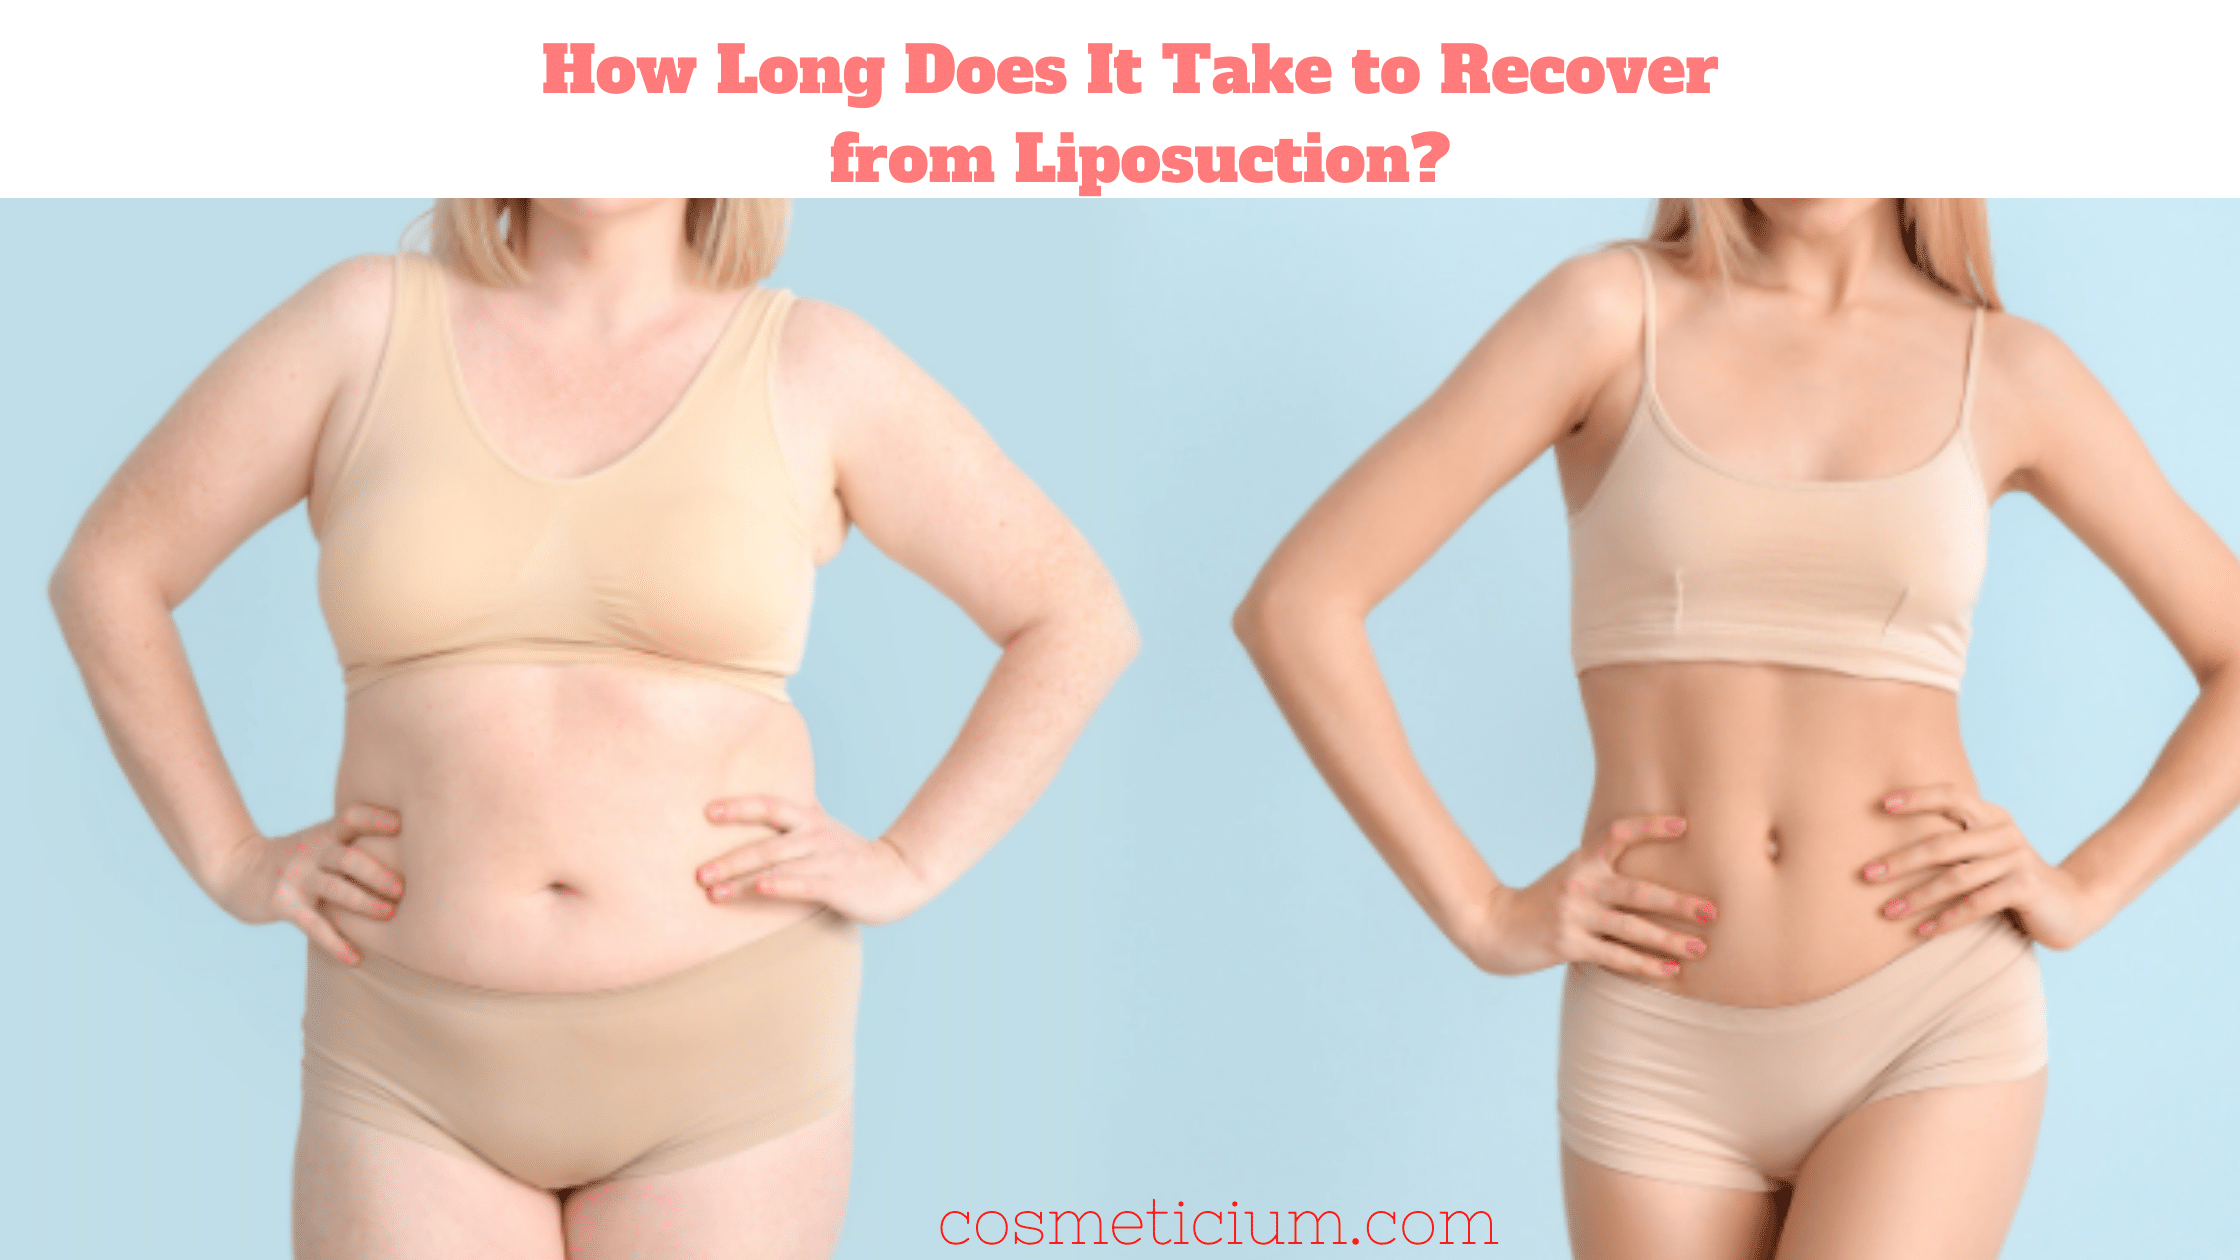 How Long Does It Take to Recover from Liposuction